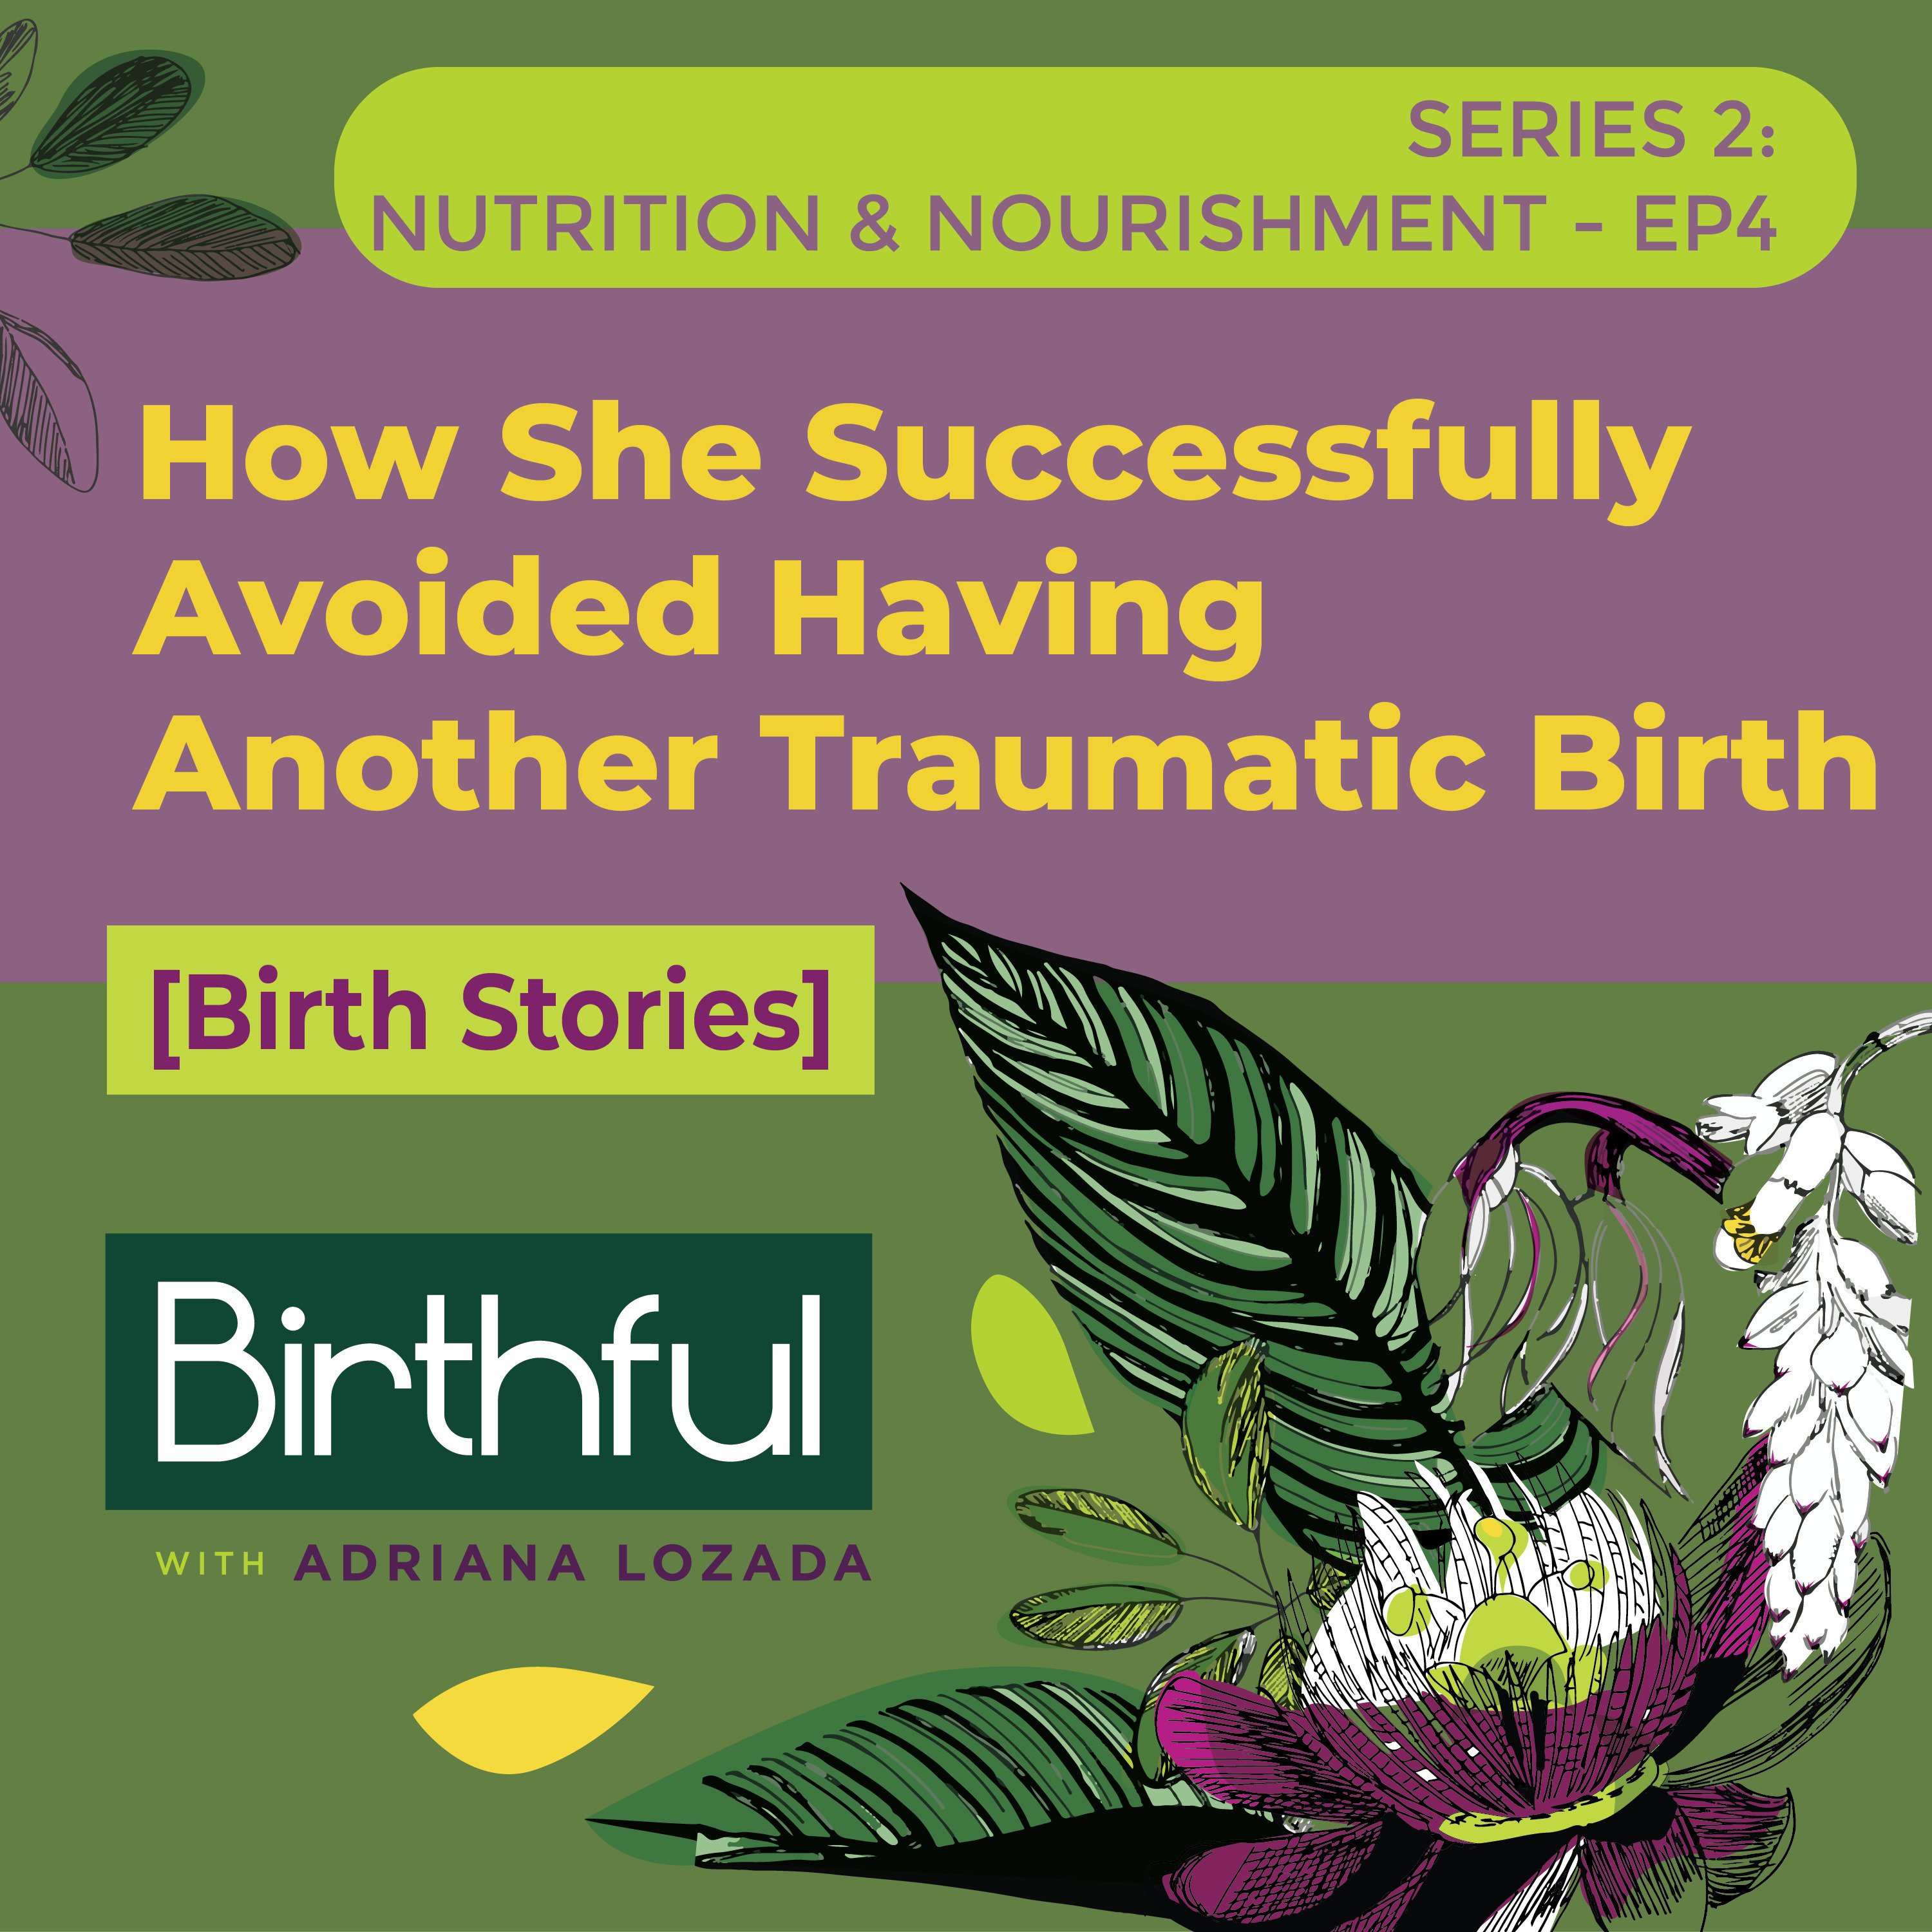 [Birth Stories] How She Proactively Avoided Having Another Traumatic Birth